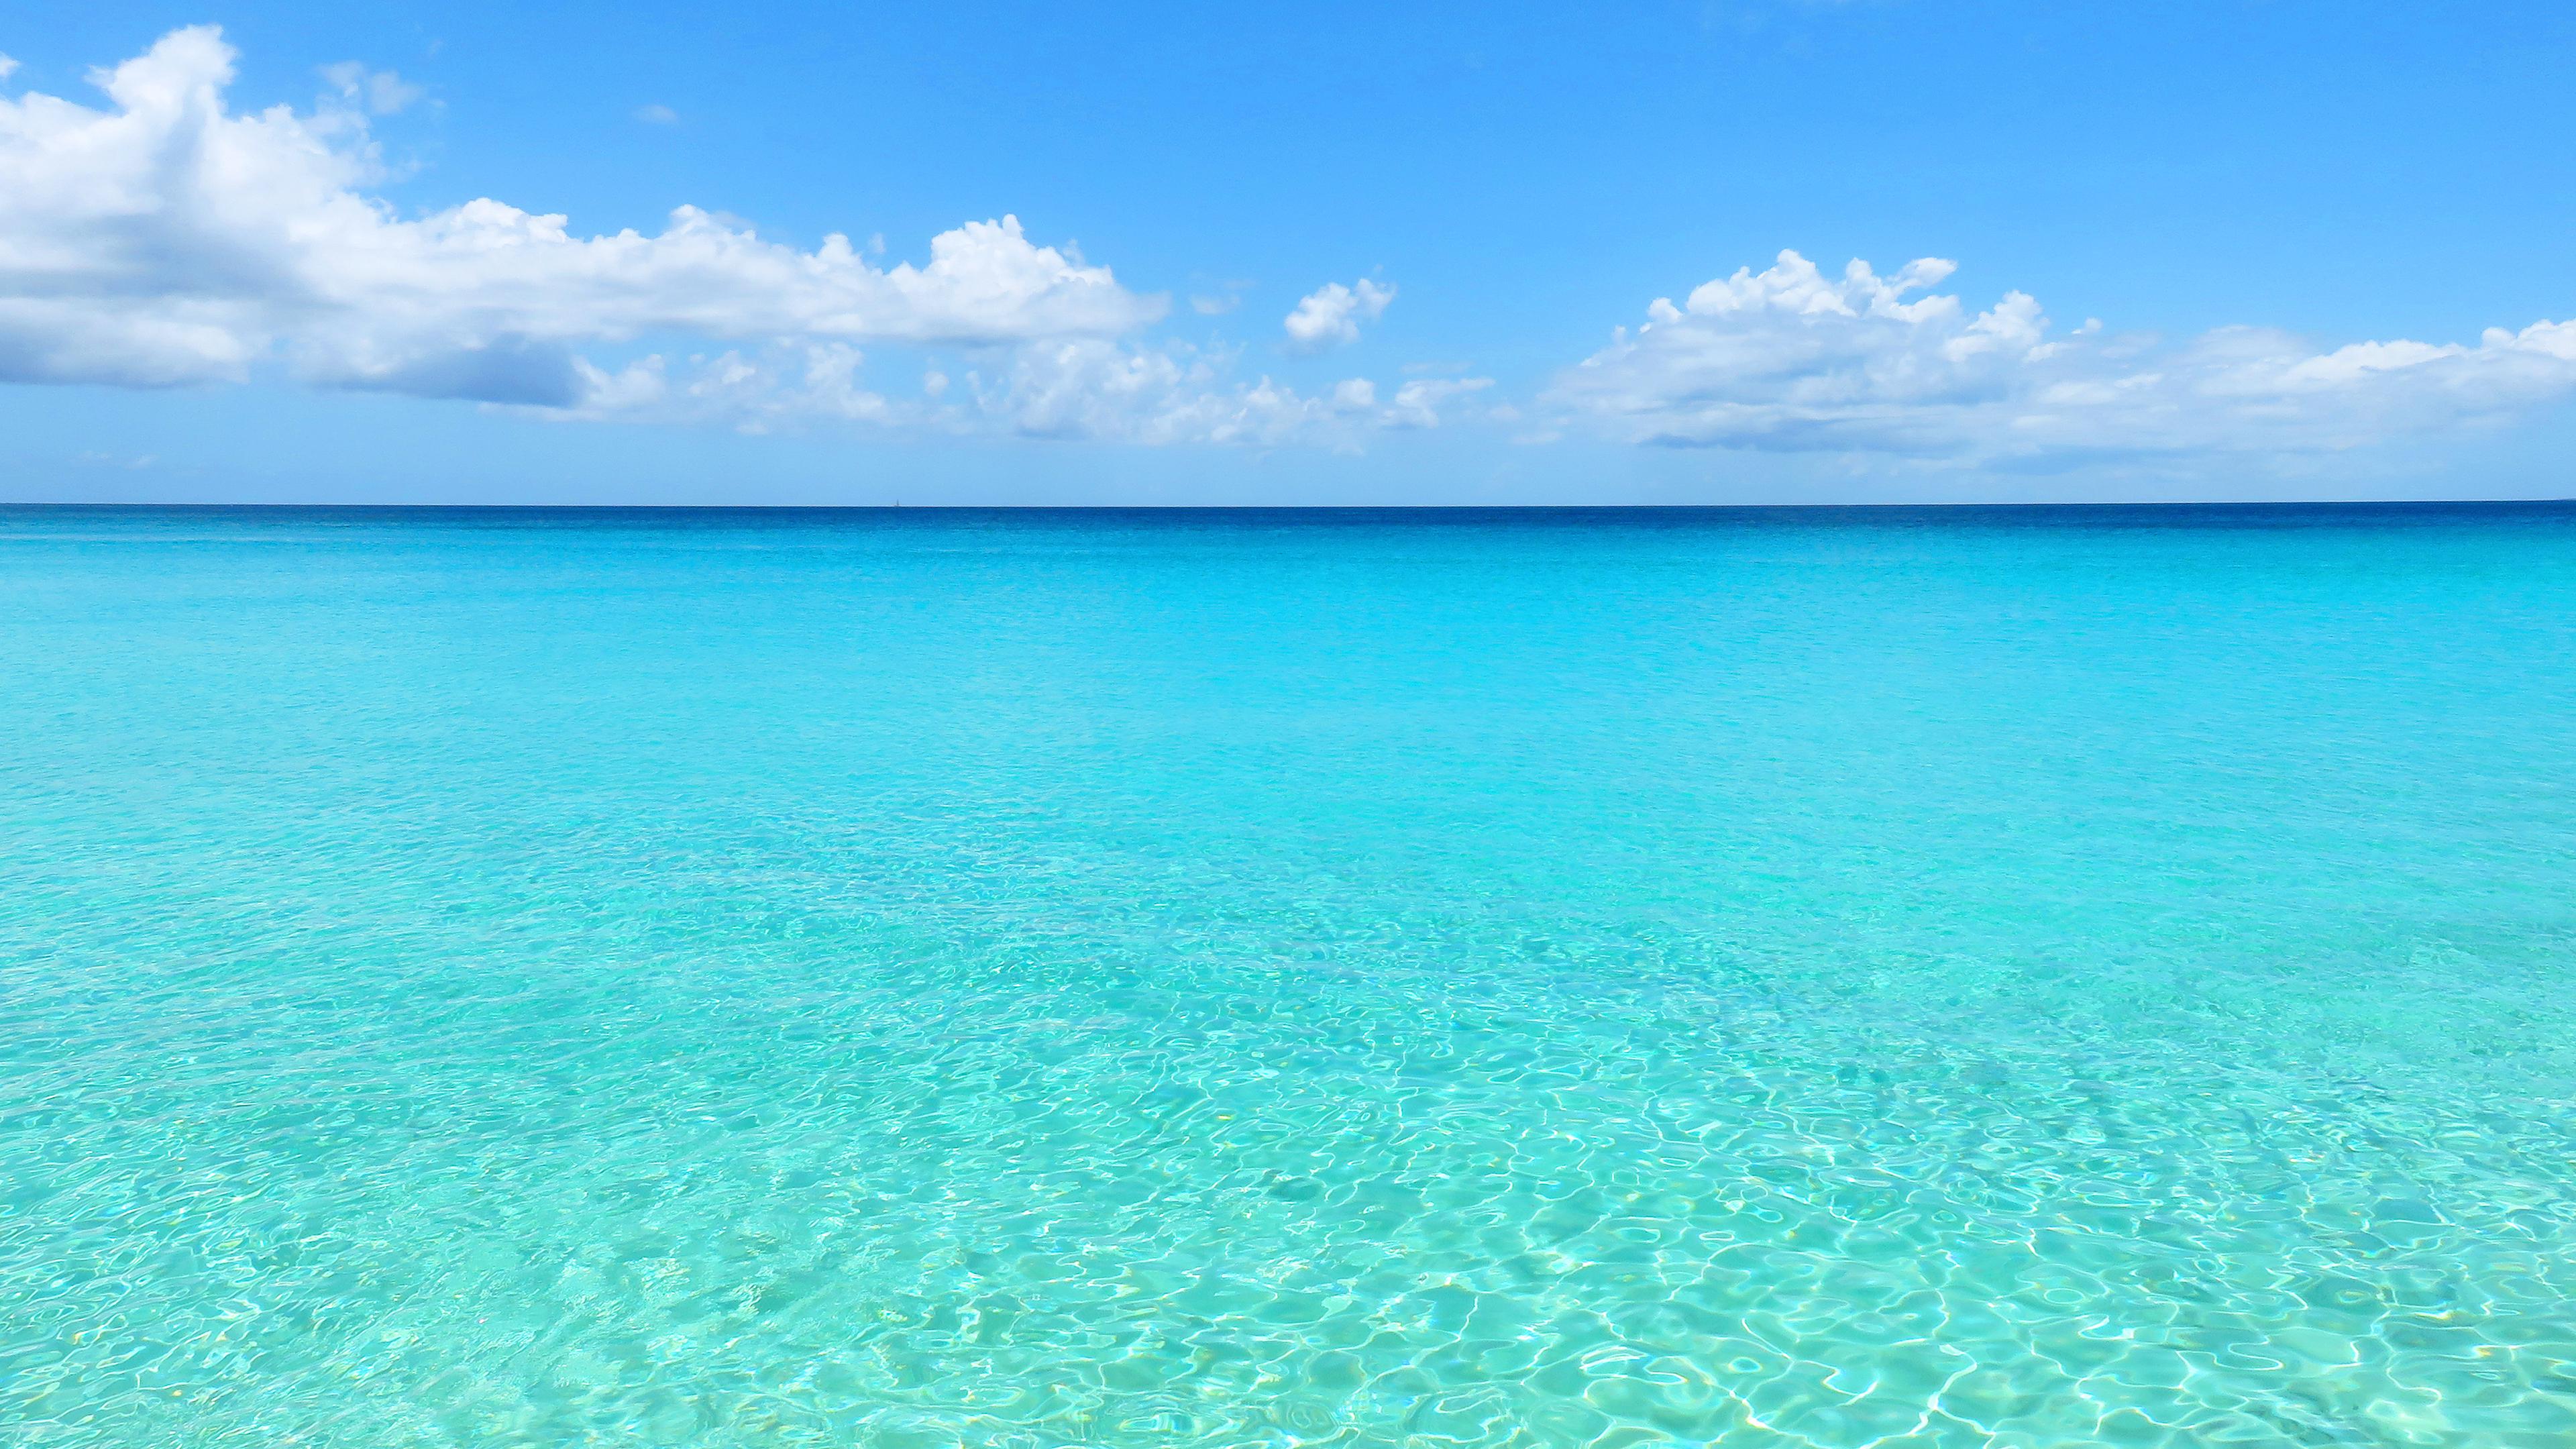 Caribbean 4K wallpaper for your desktop or mobile screen free and easy to download